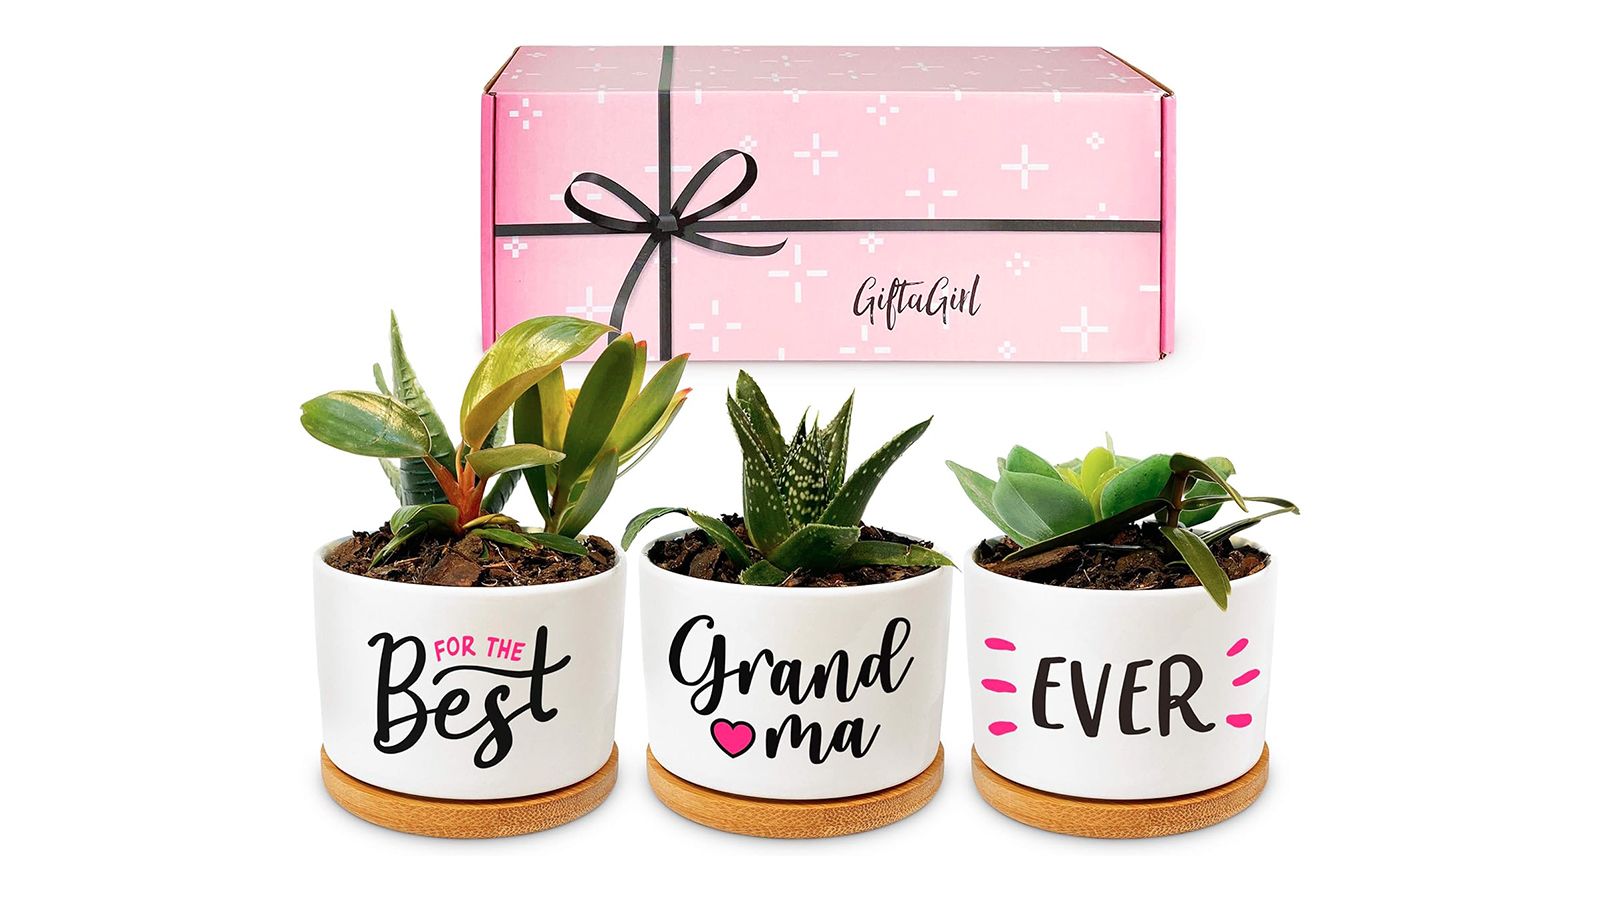 23 Best Gifts for Grandma 2023